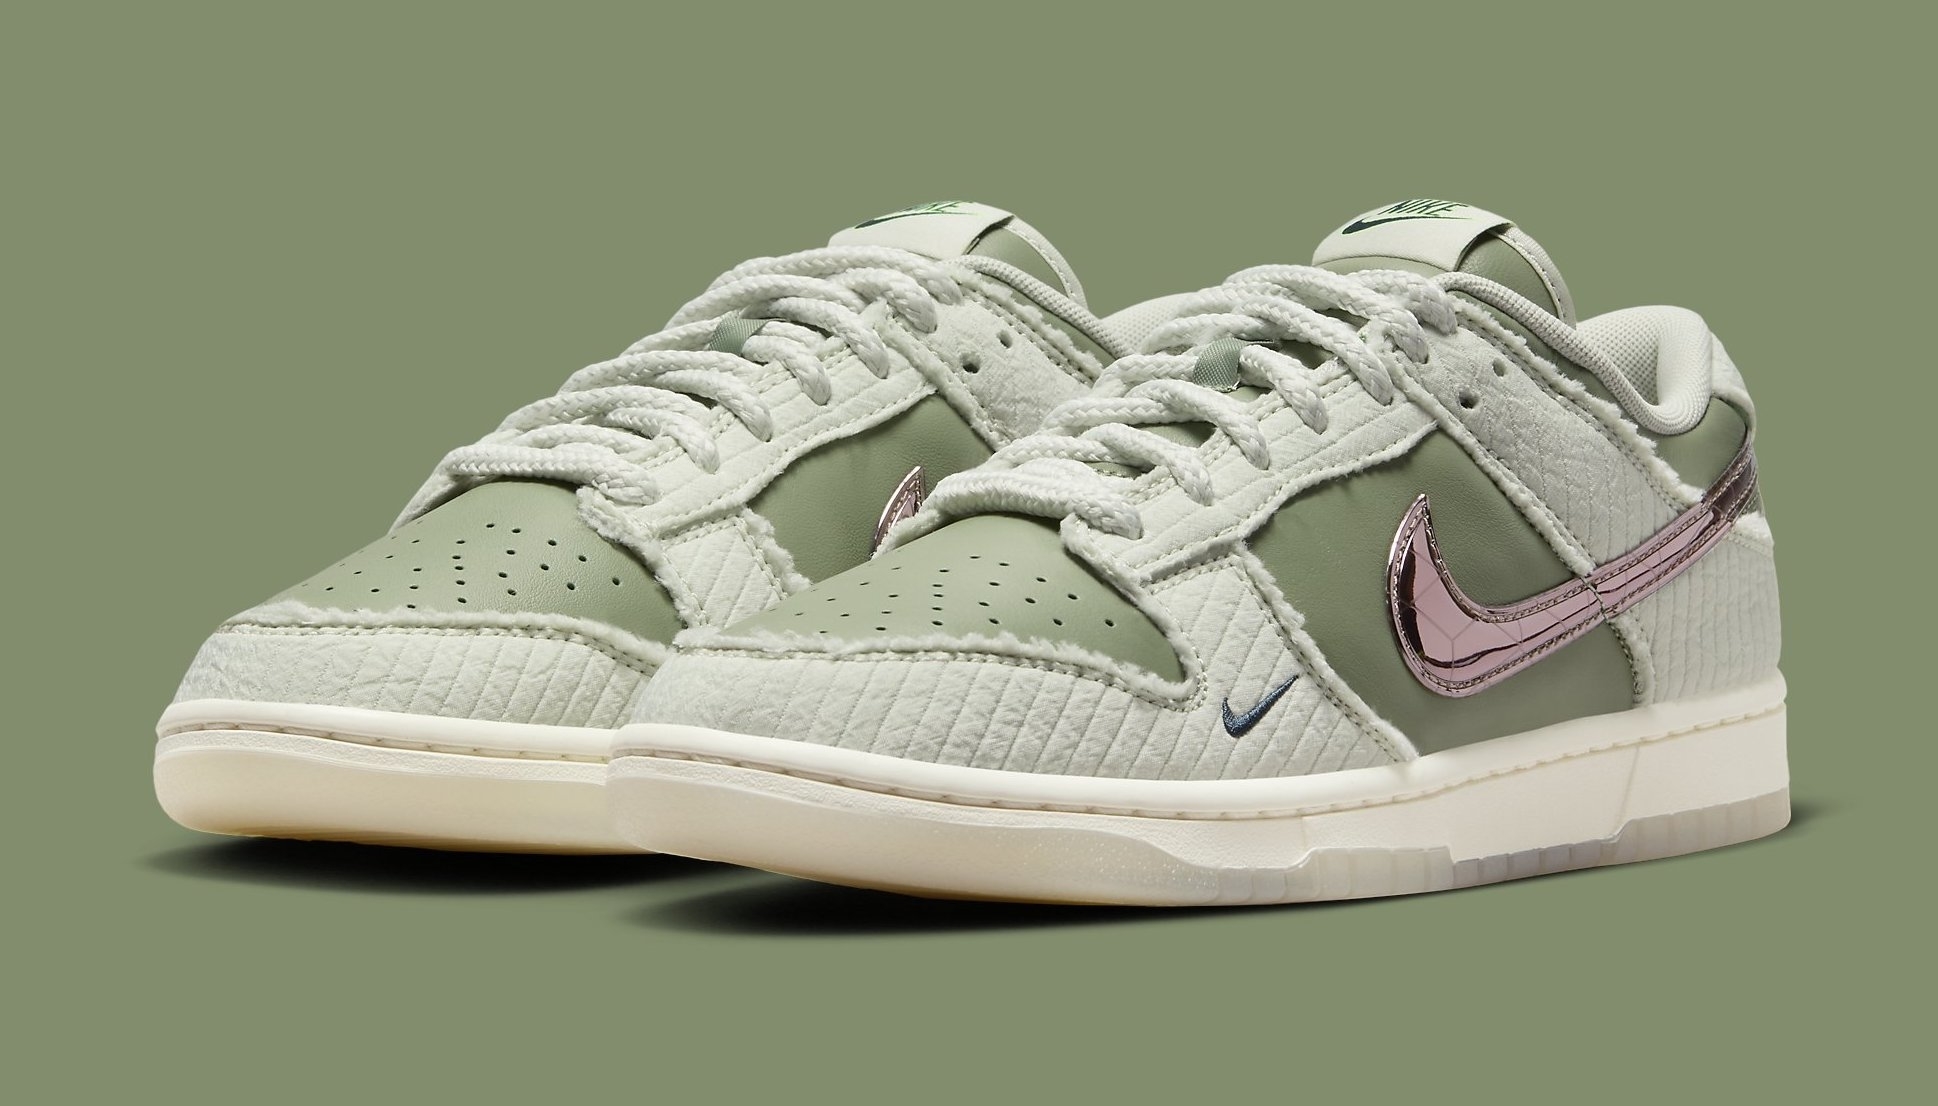 Embroidered Swooshes In Mean Green Highlight This Nike Waffle